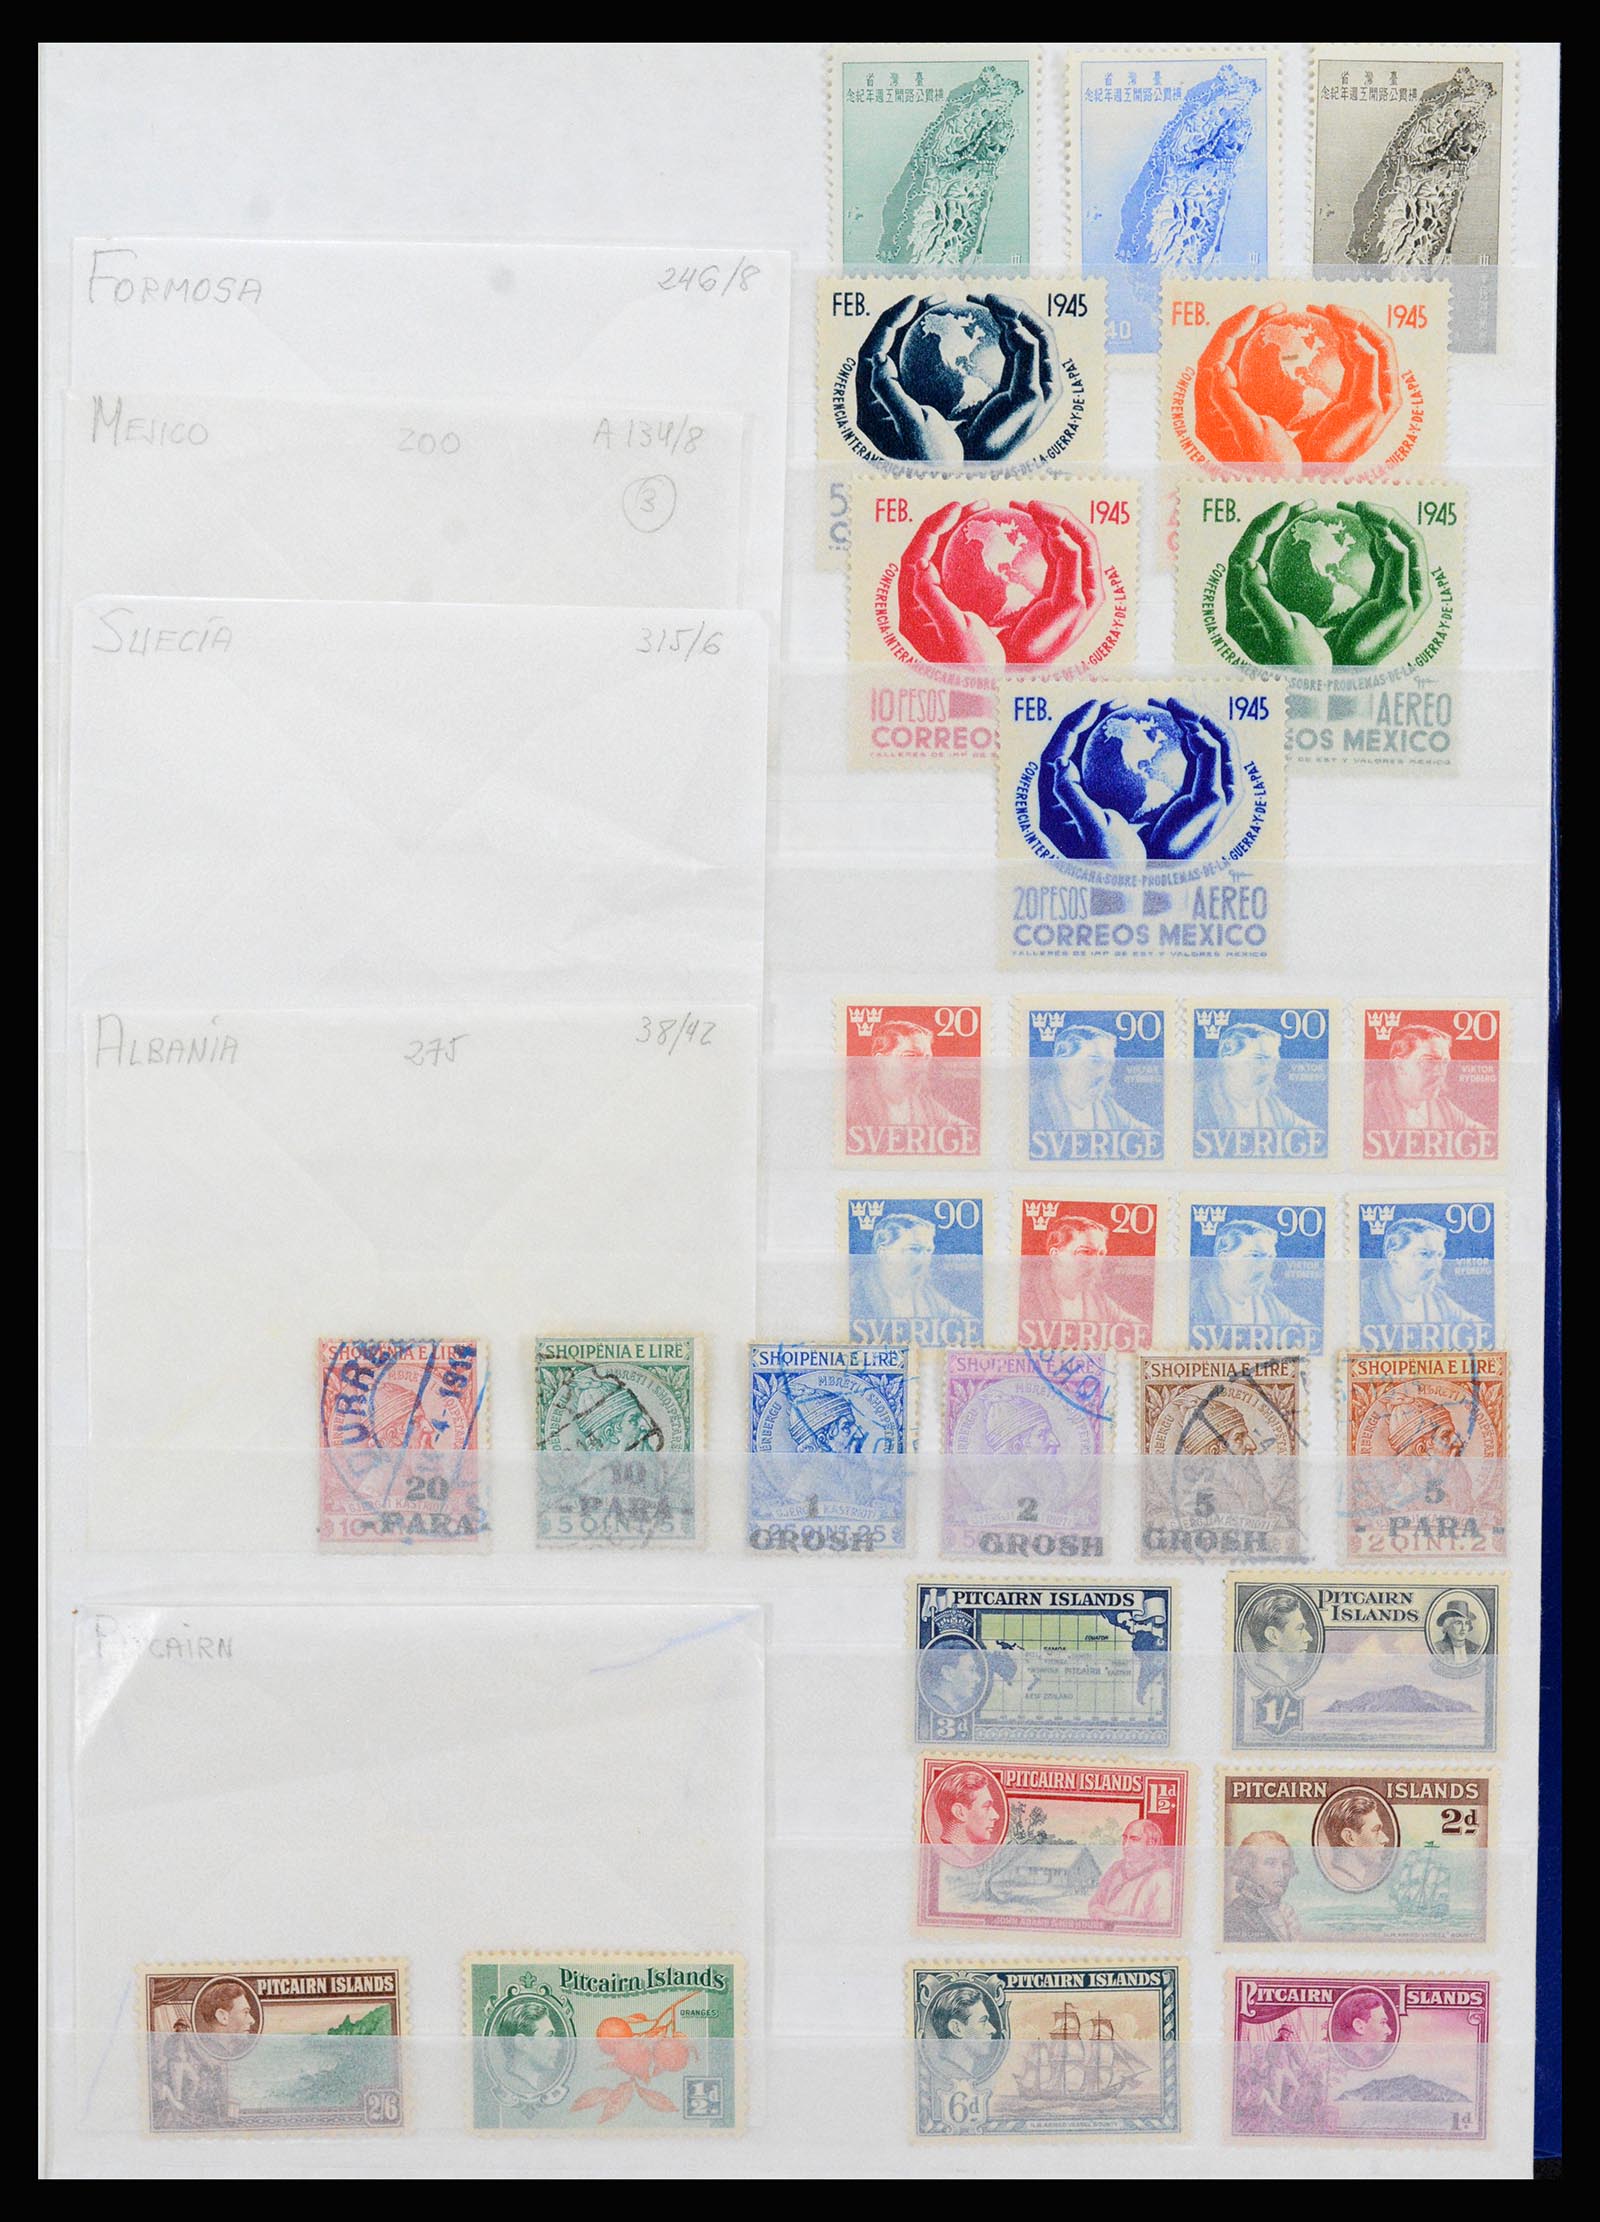 37176 017 - Stamp collection 37176 World 1855-1960.